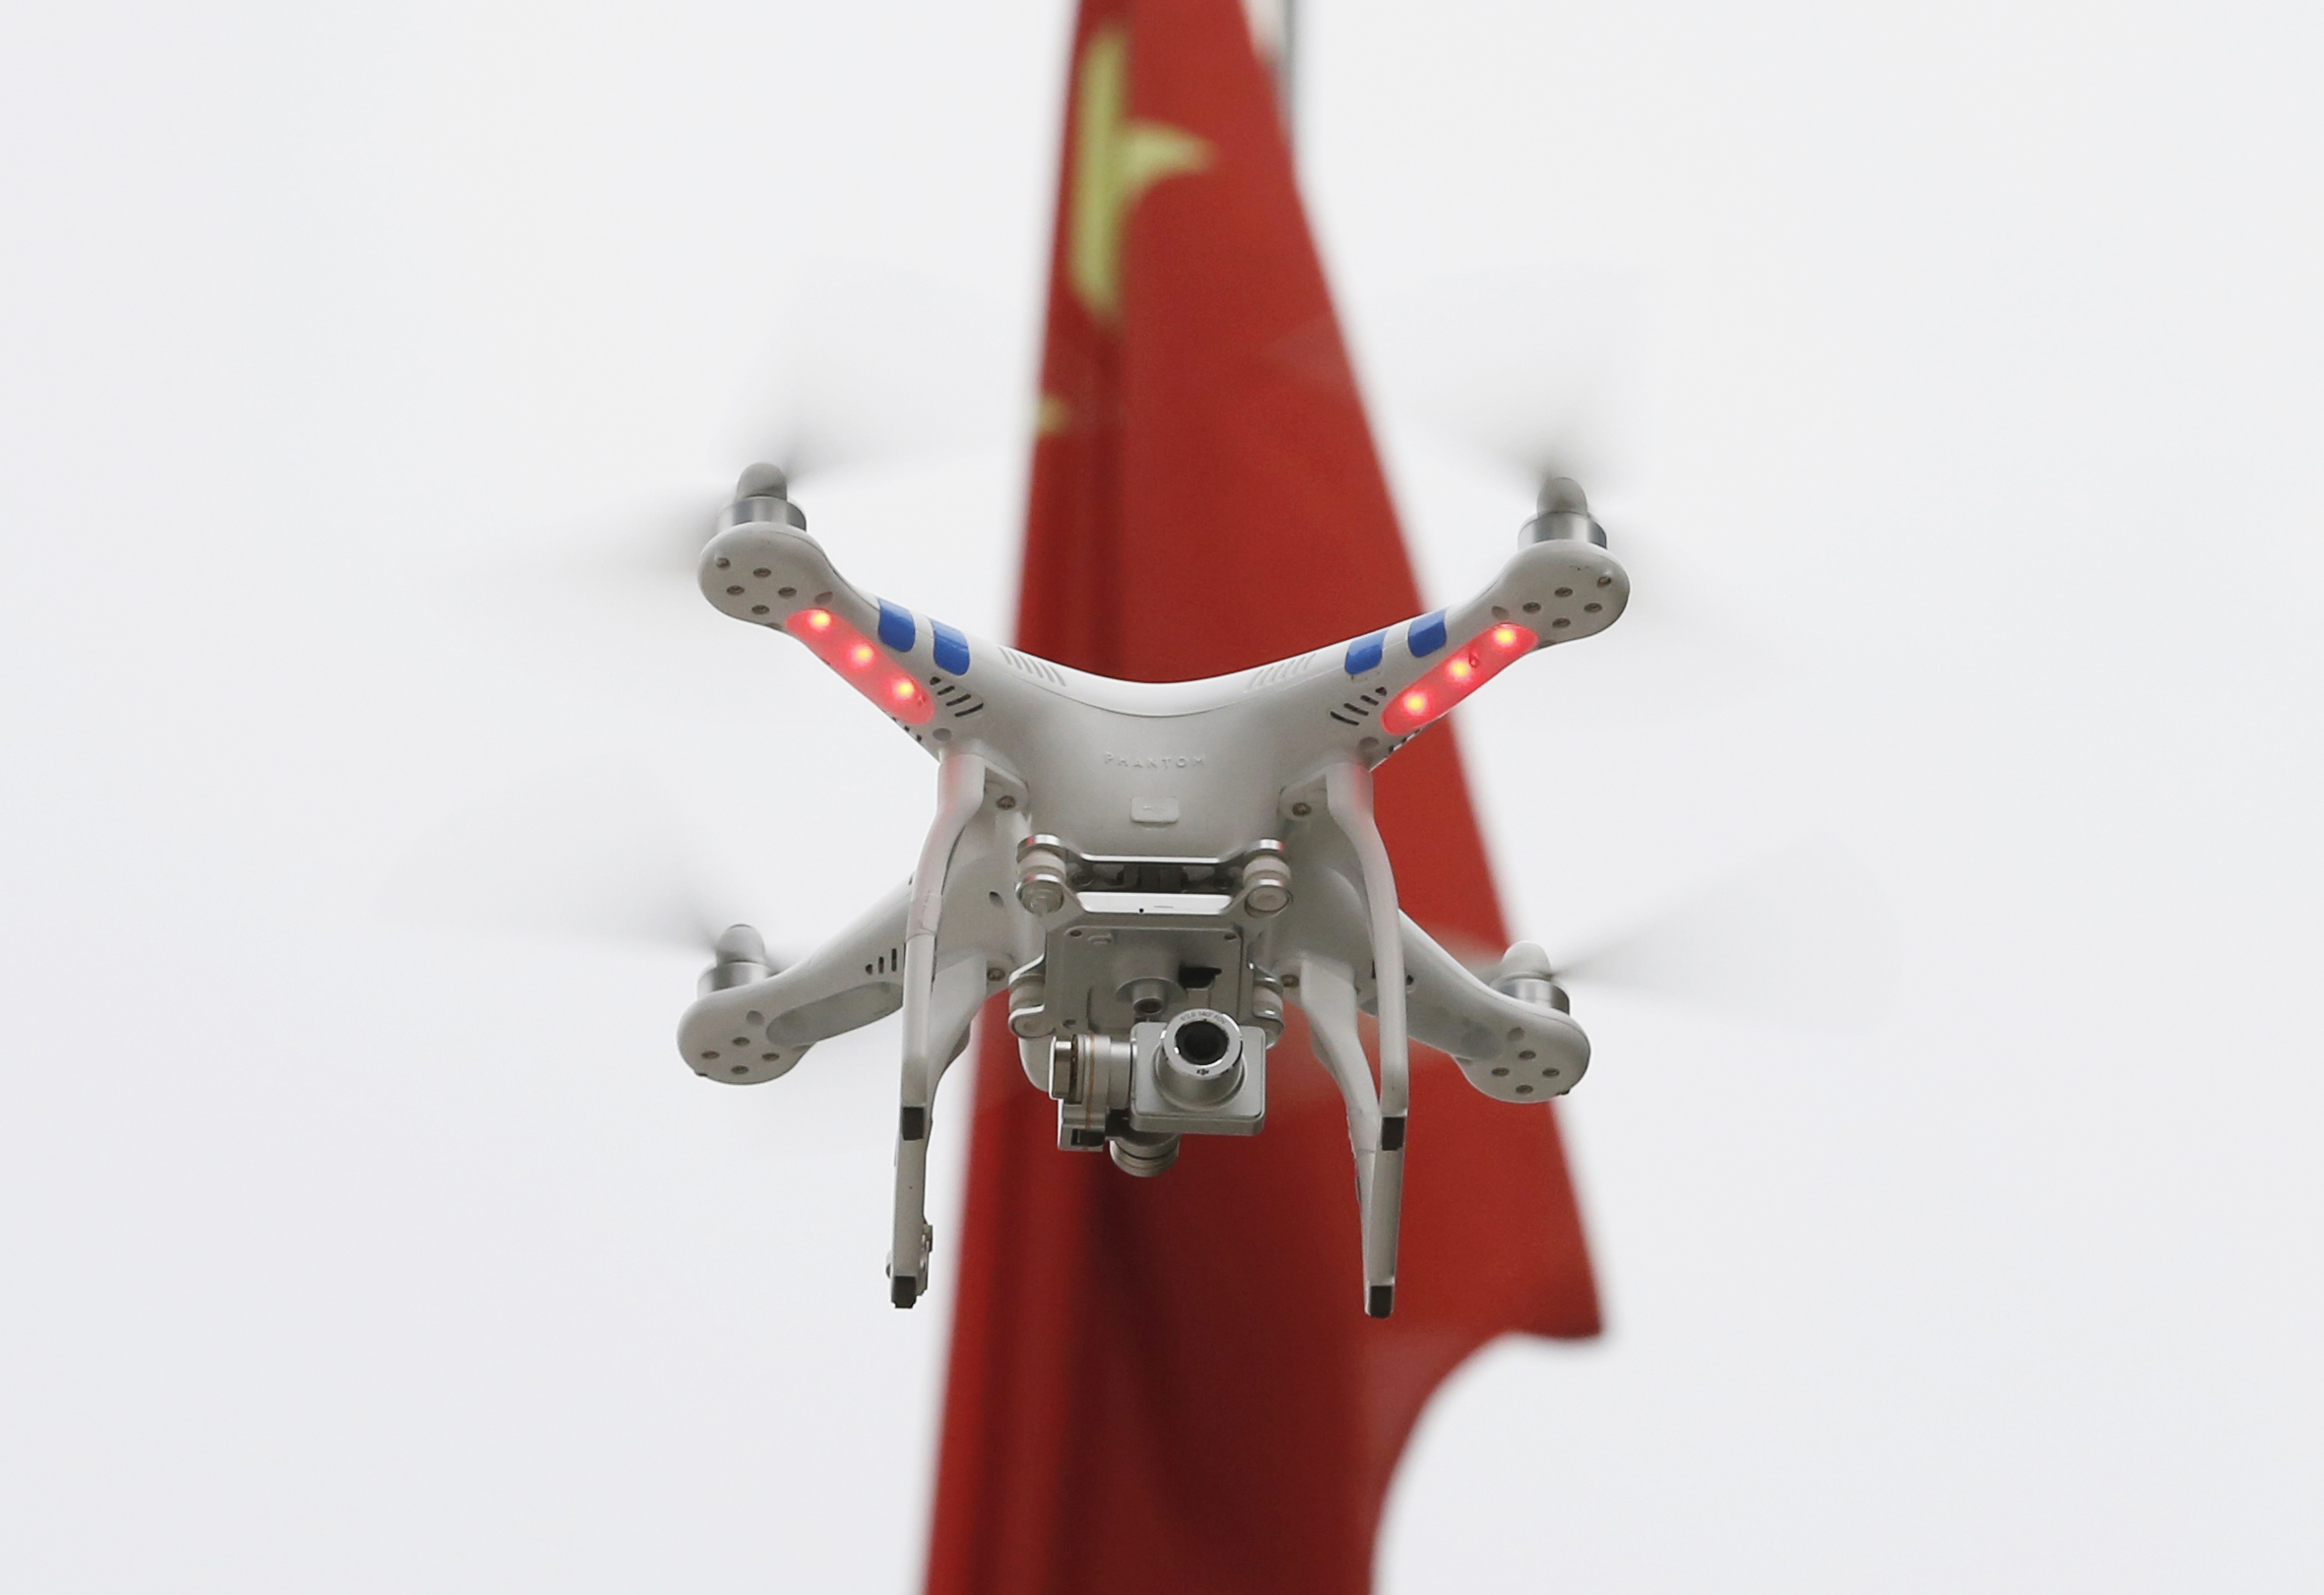 Beijing has restricted drone sales around a planned parade to celebrate the end of the second world war. Photo: AP